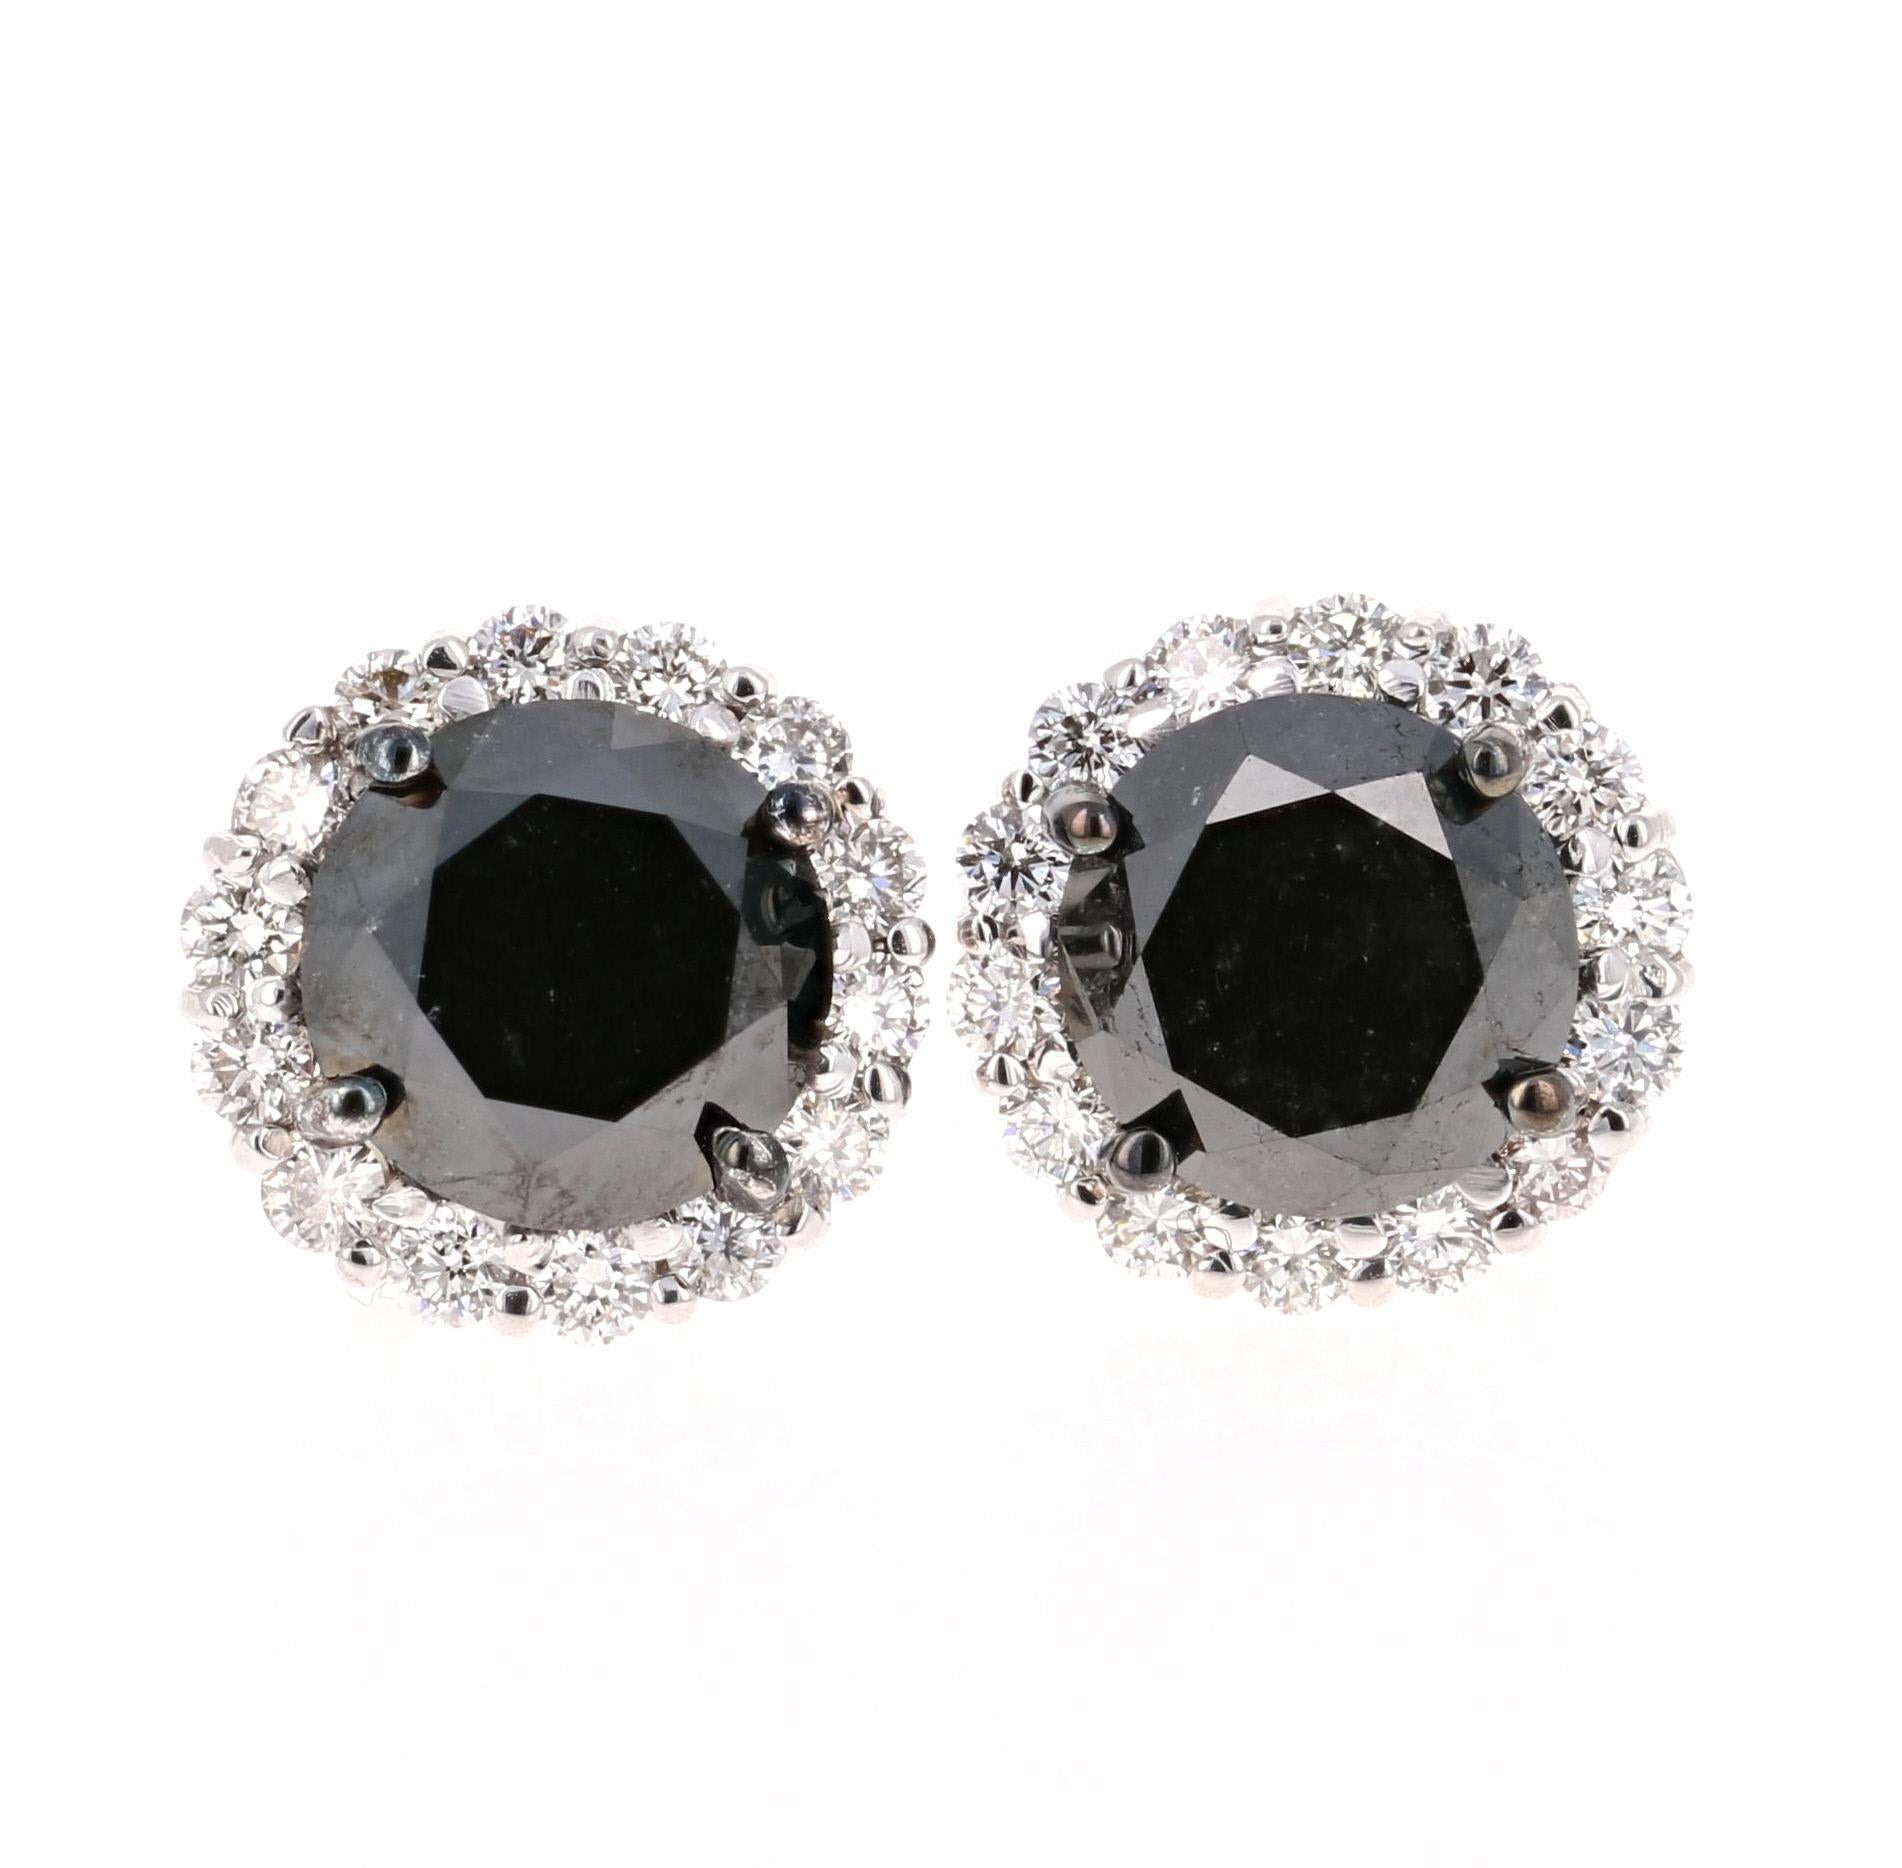 Beautiful 6.30 Carat Black Diamond and White Diamond Stud Earrings in 14K White Gold.  

These earrings have 2 Black Round Cut Diamonds that weigh 5.49 Carats and 28 Round Cut Diamonds that weigh 0.81 Carats. The White Diamonds have a clarity and